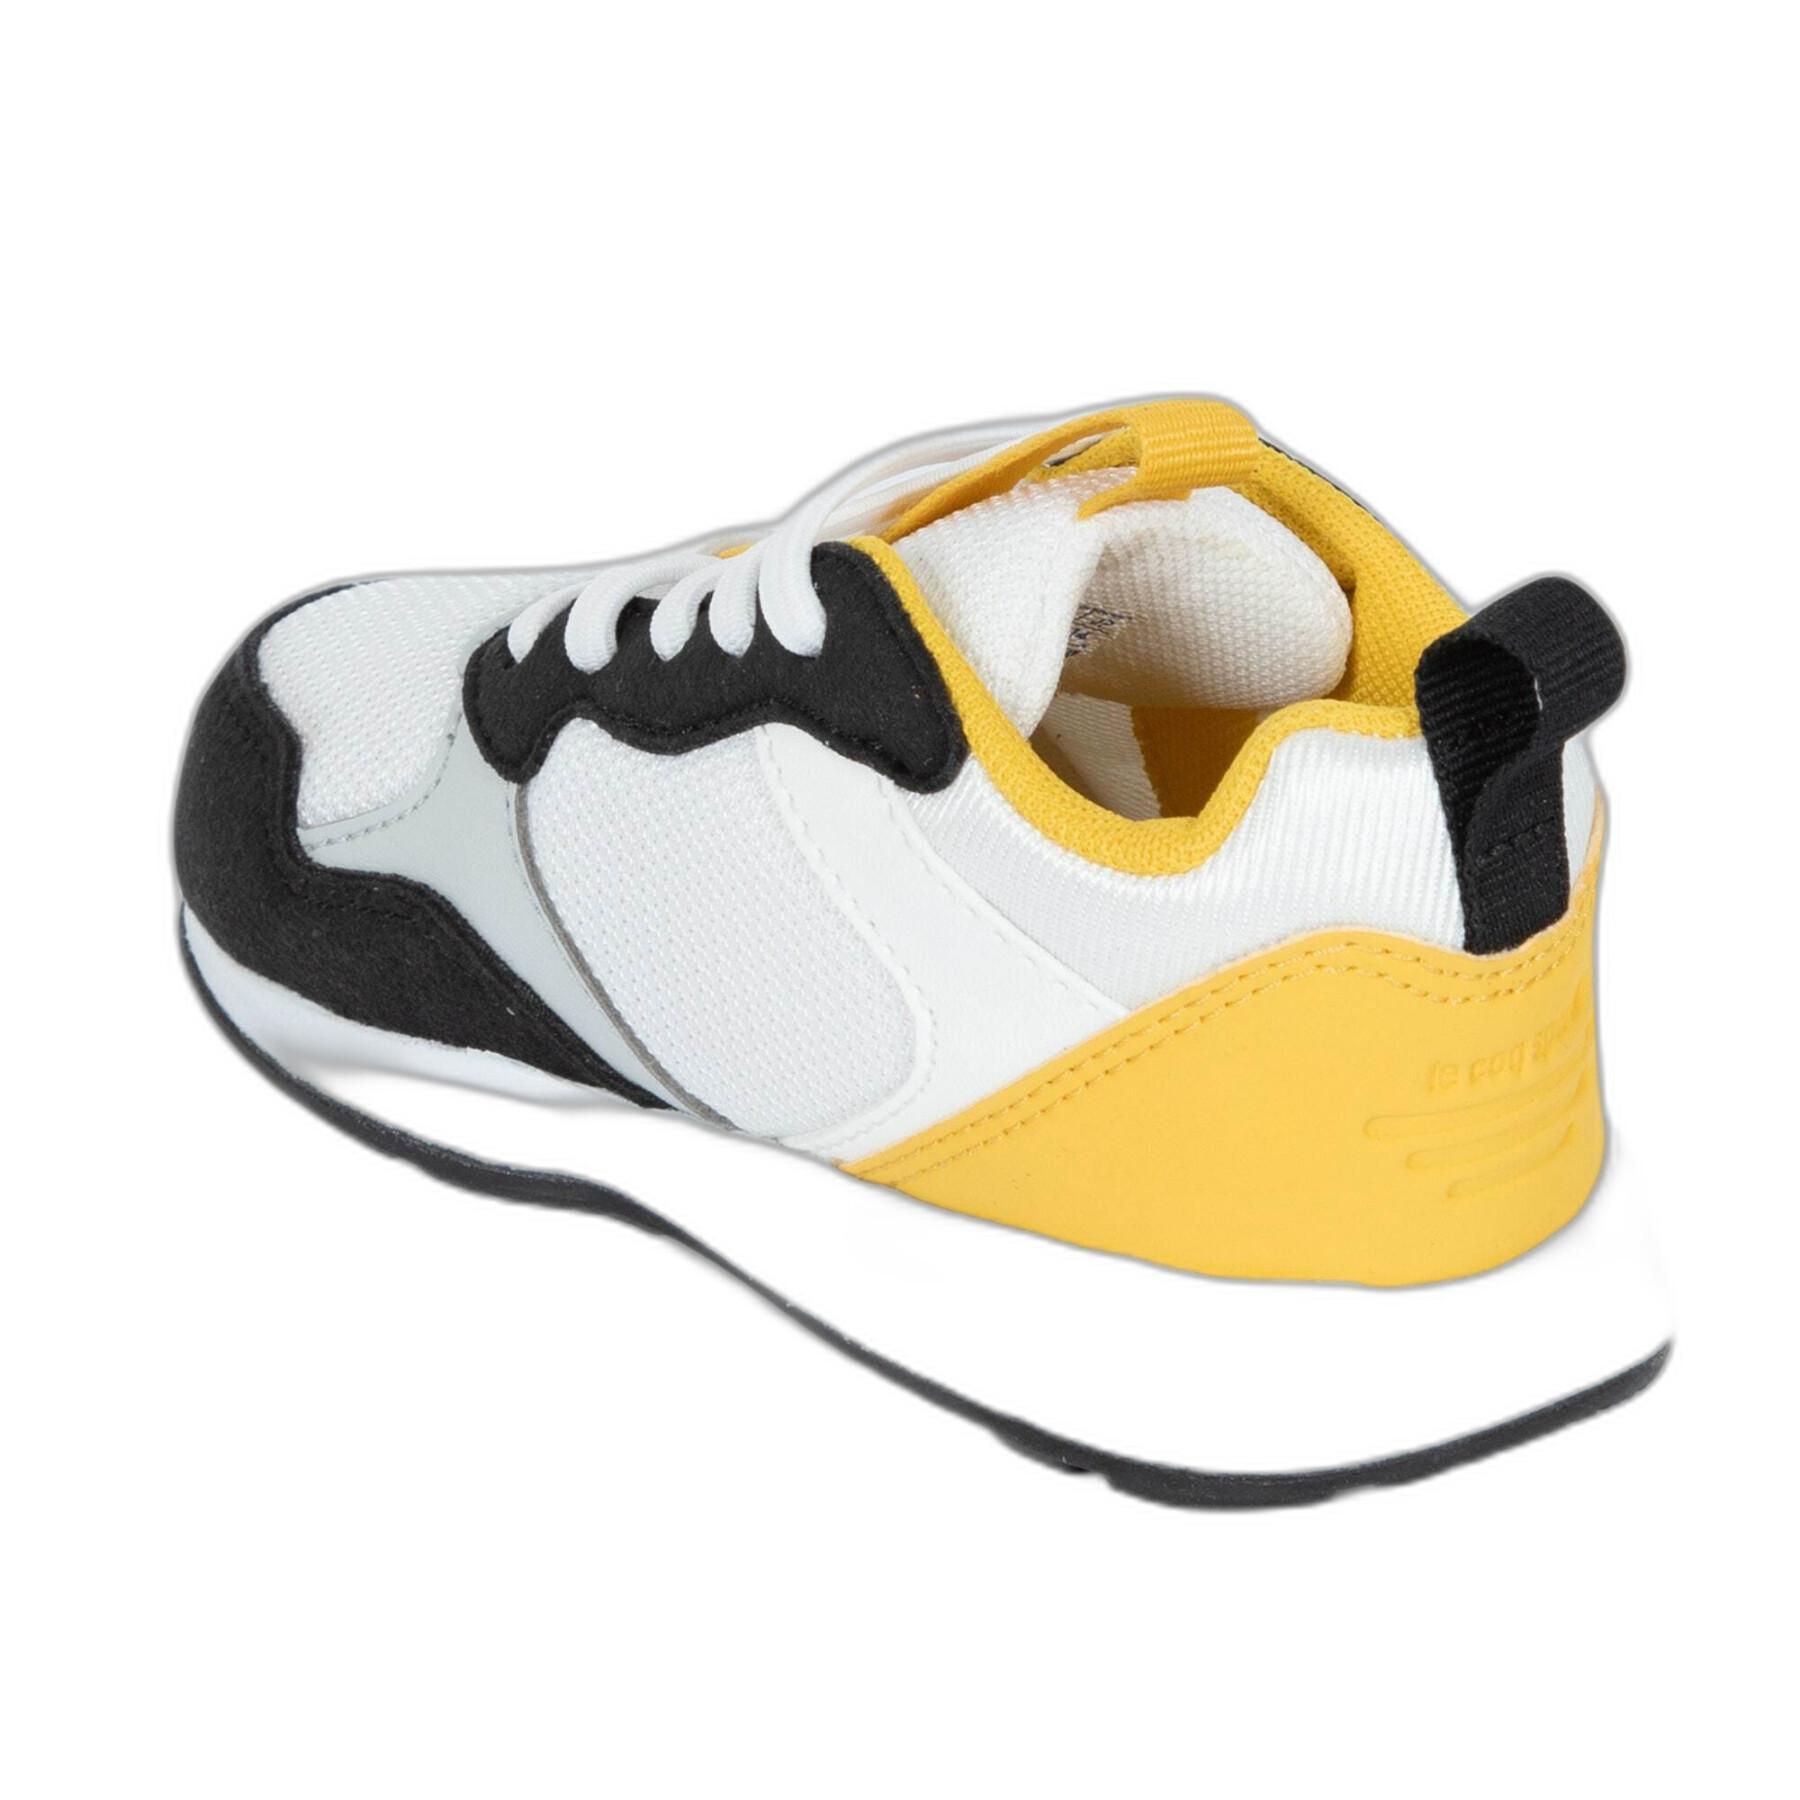 Kindertrainers Le Coq Sportif R500 Inf